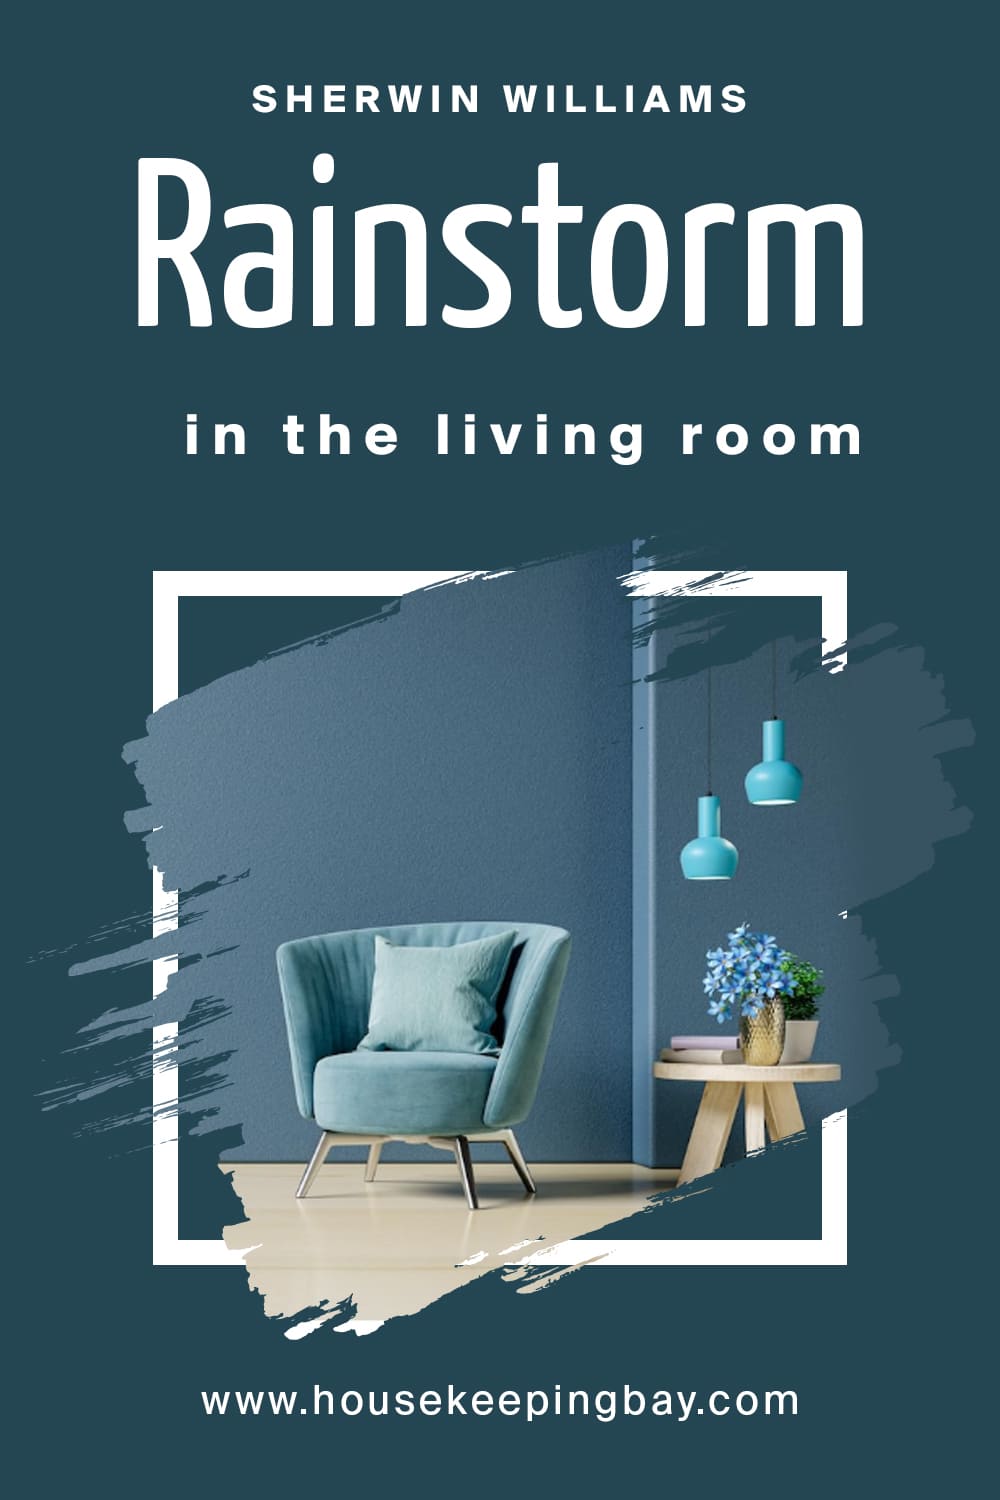 Sherwin Williams. Rainstorm In the Living Room